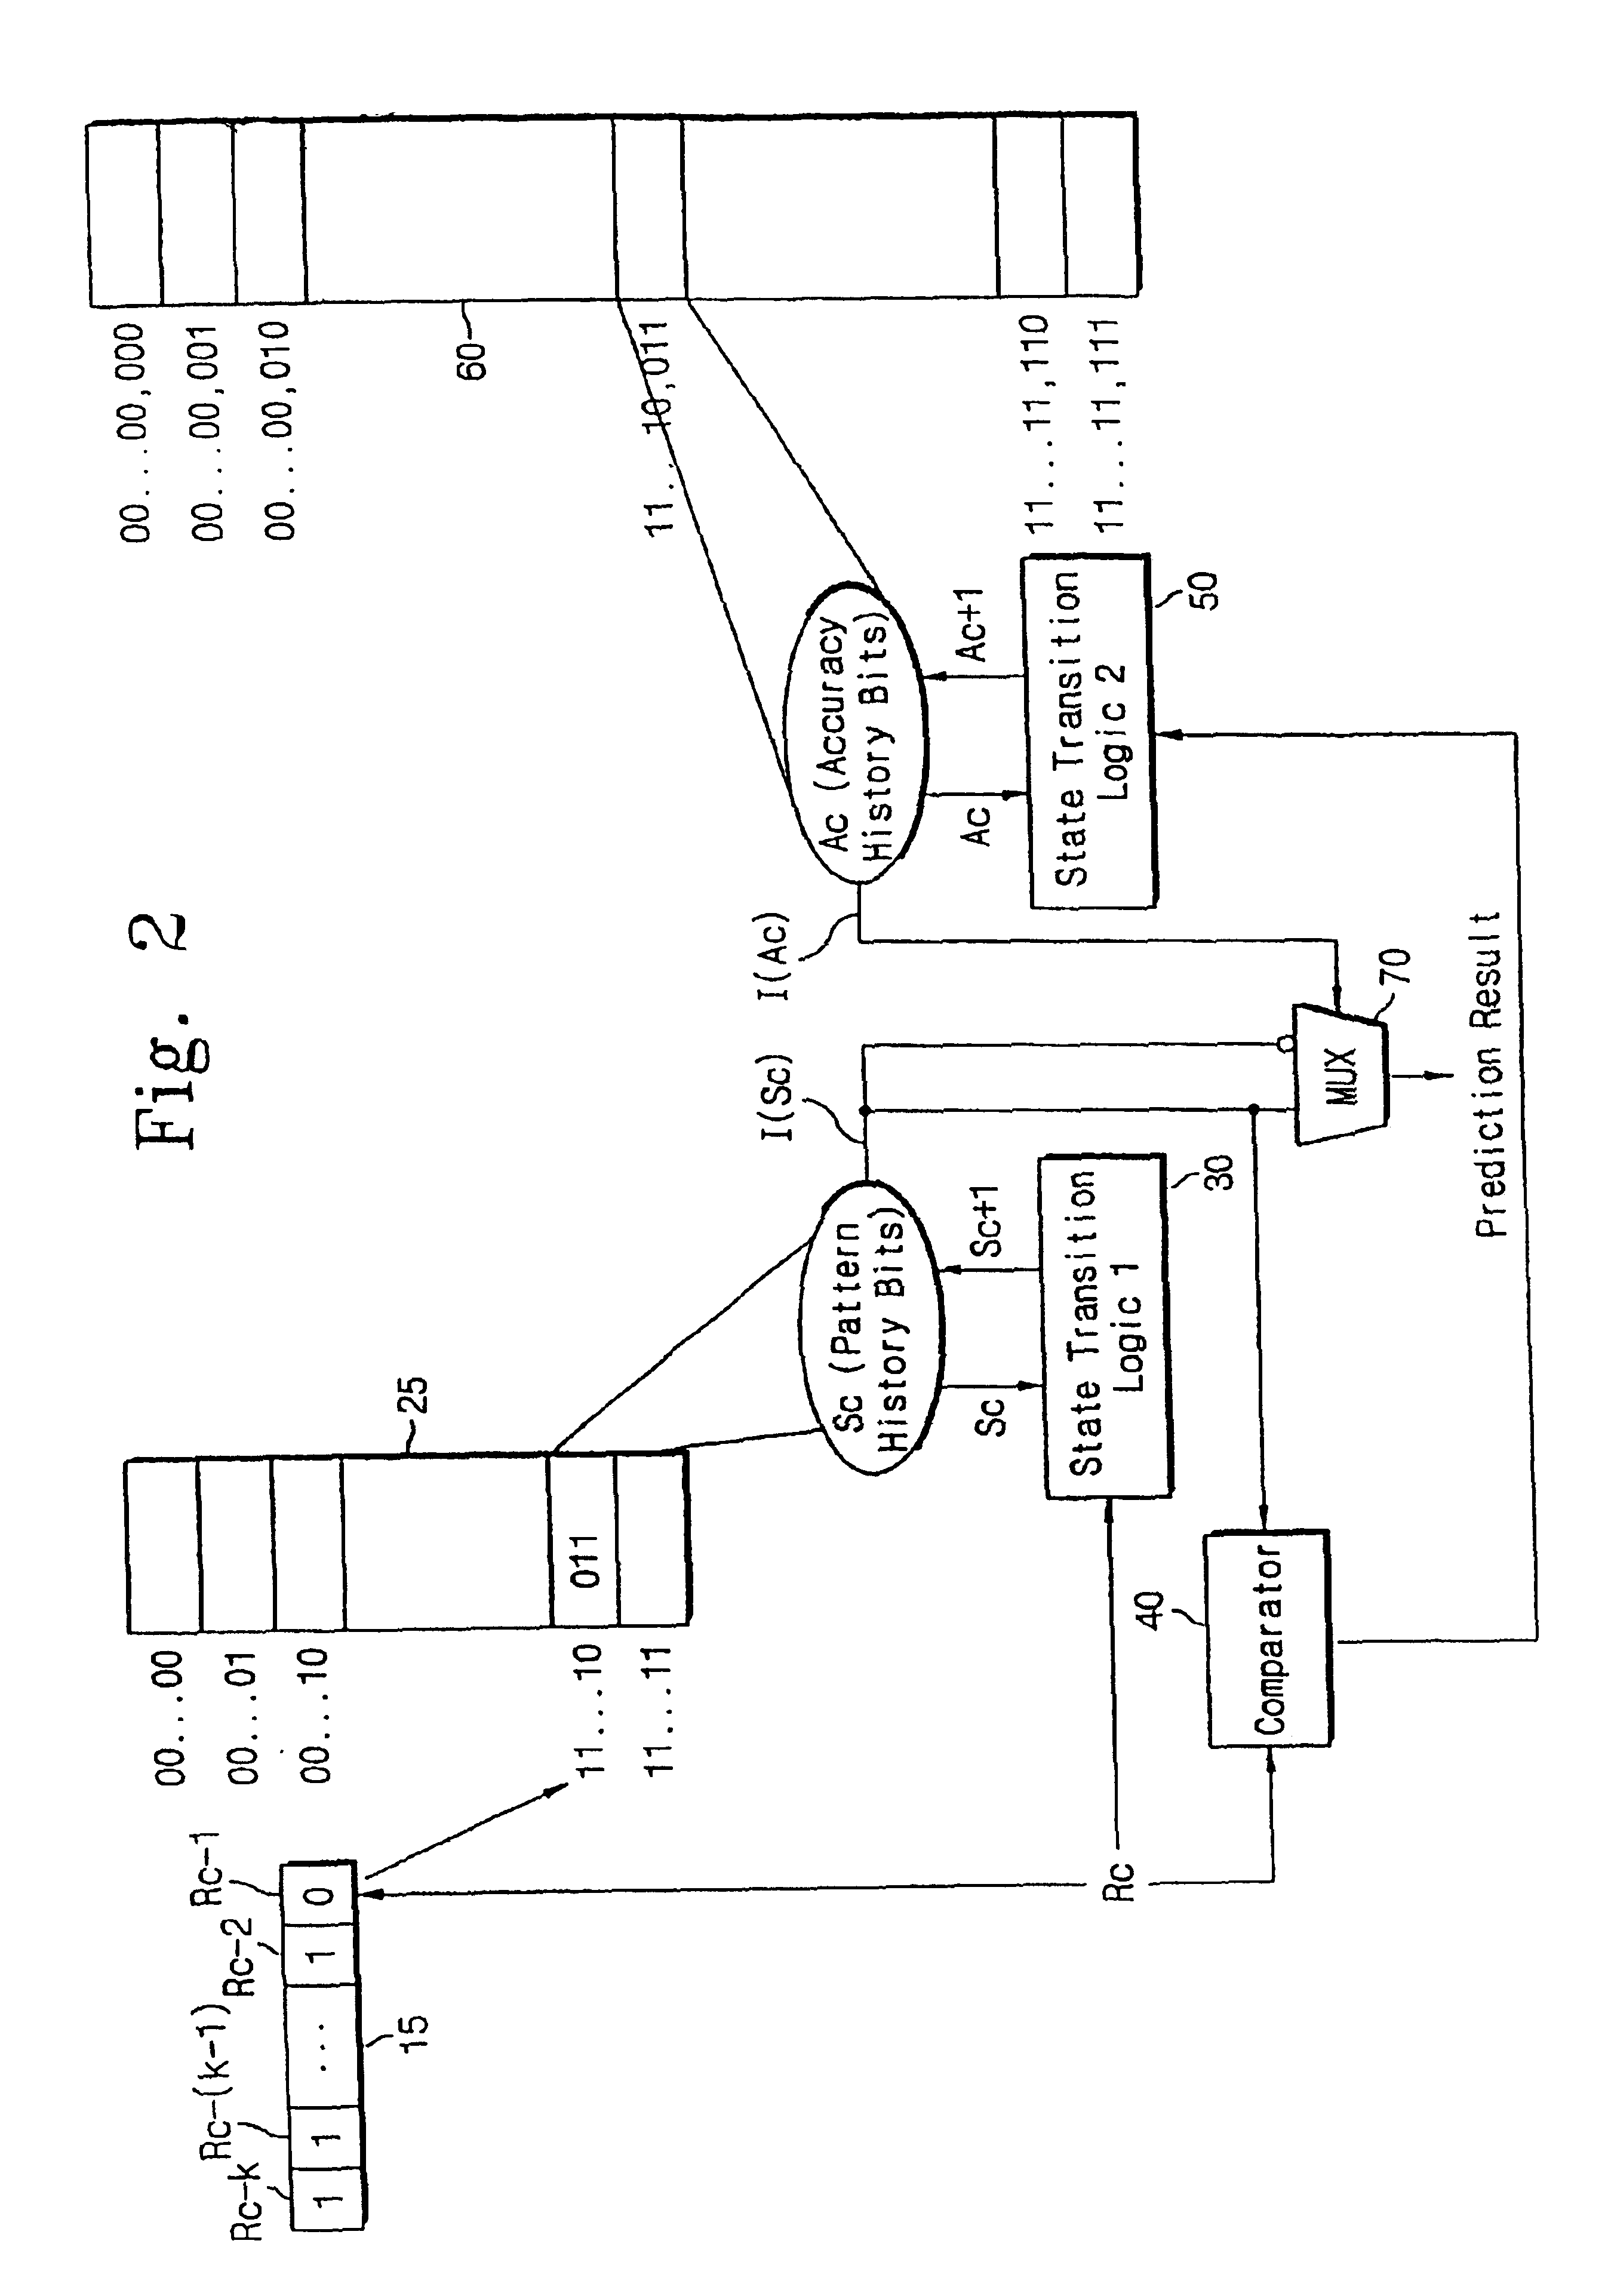 Multi-level pattern history branch predictor using branch prediction accuracy history to mediate the predicted outcome